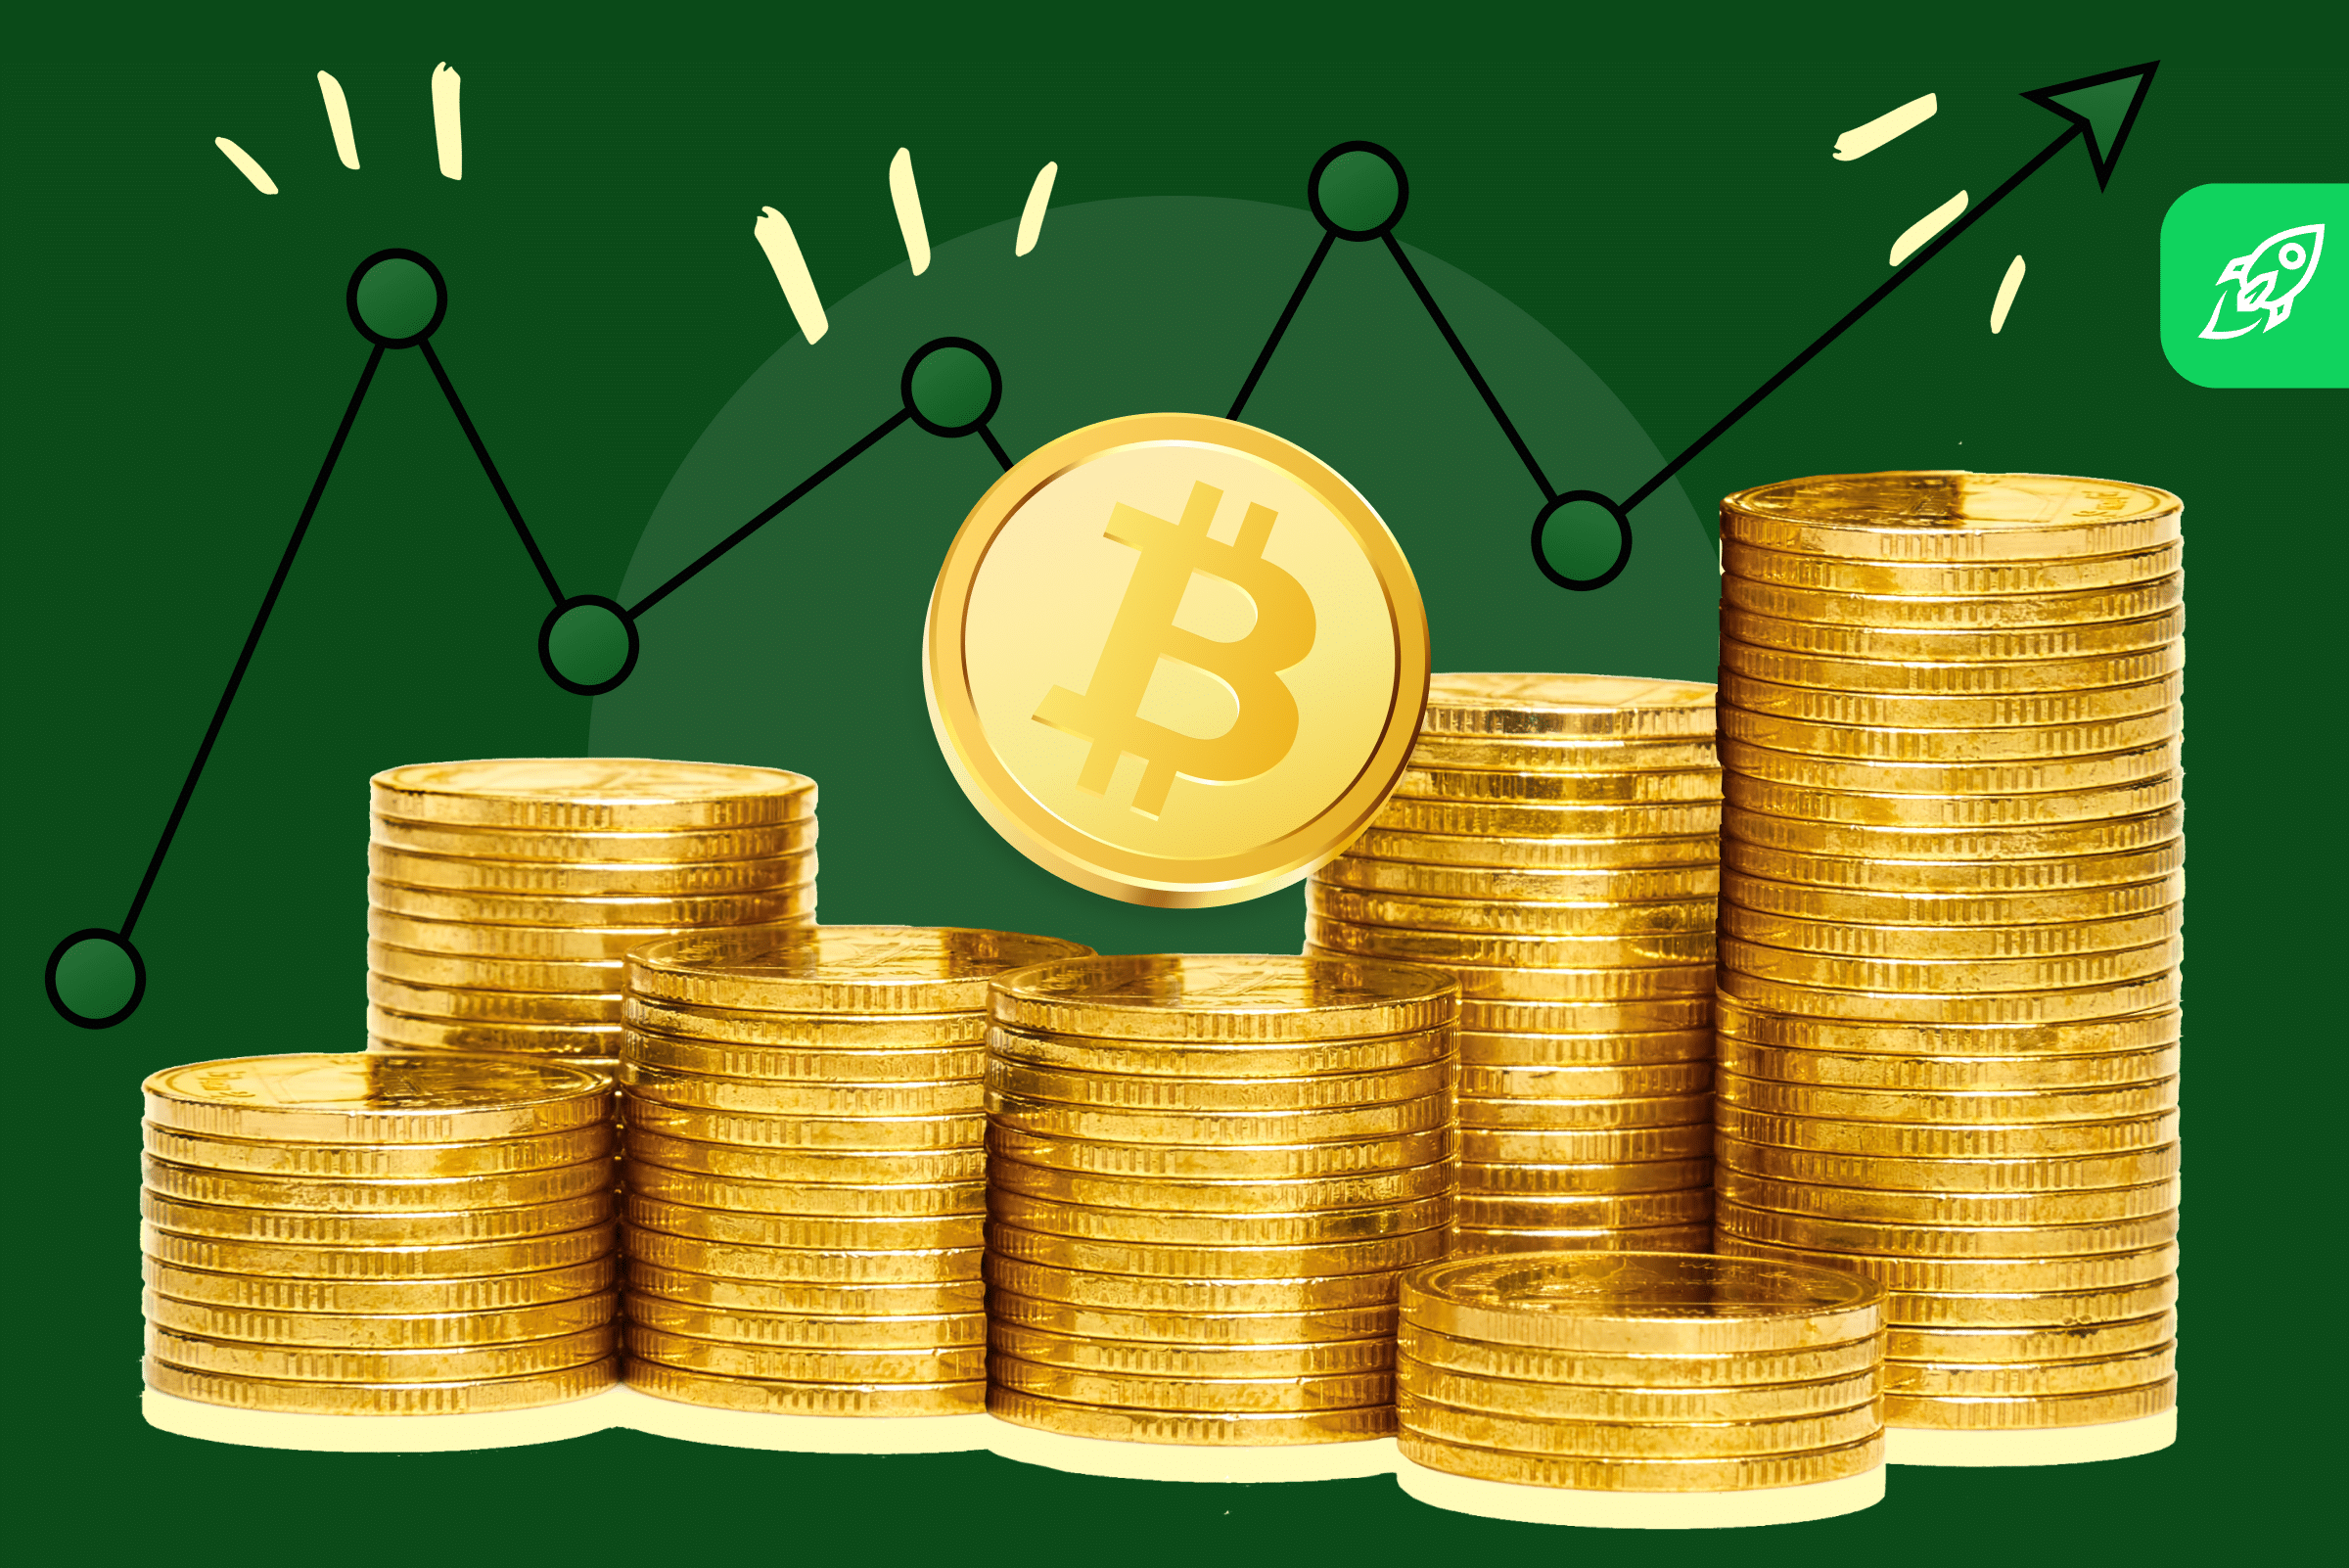 Reddit mentions may help predict changes in cryptocurrency value | New Scientist